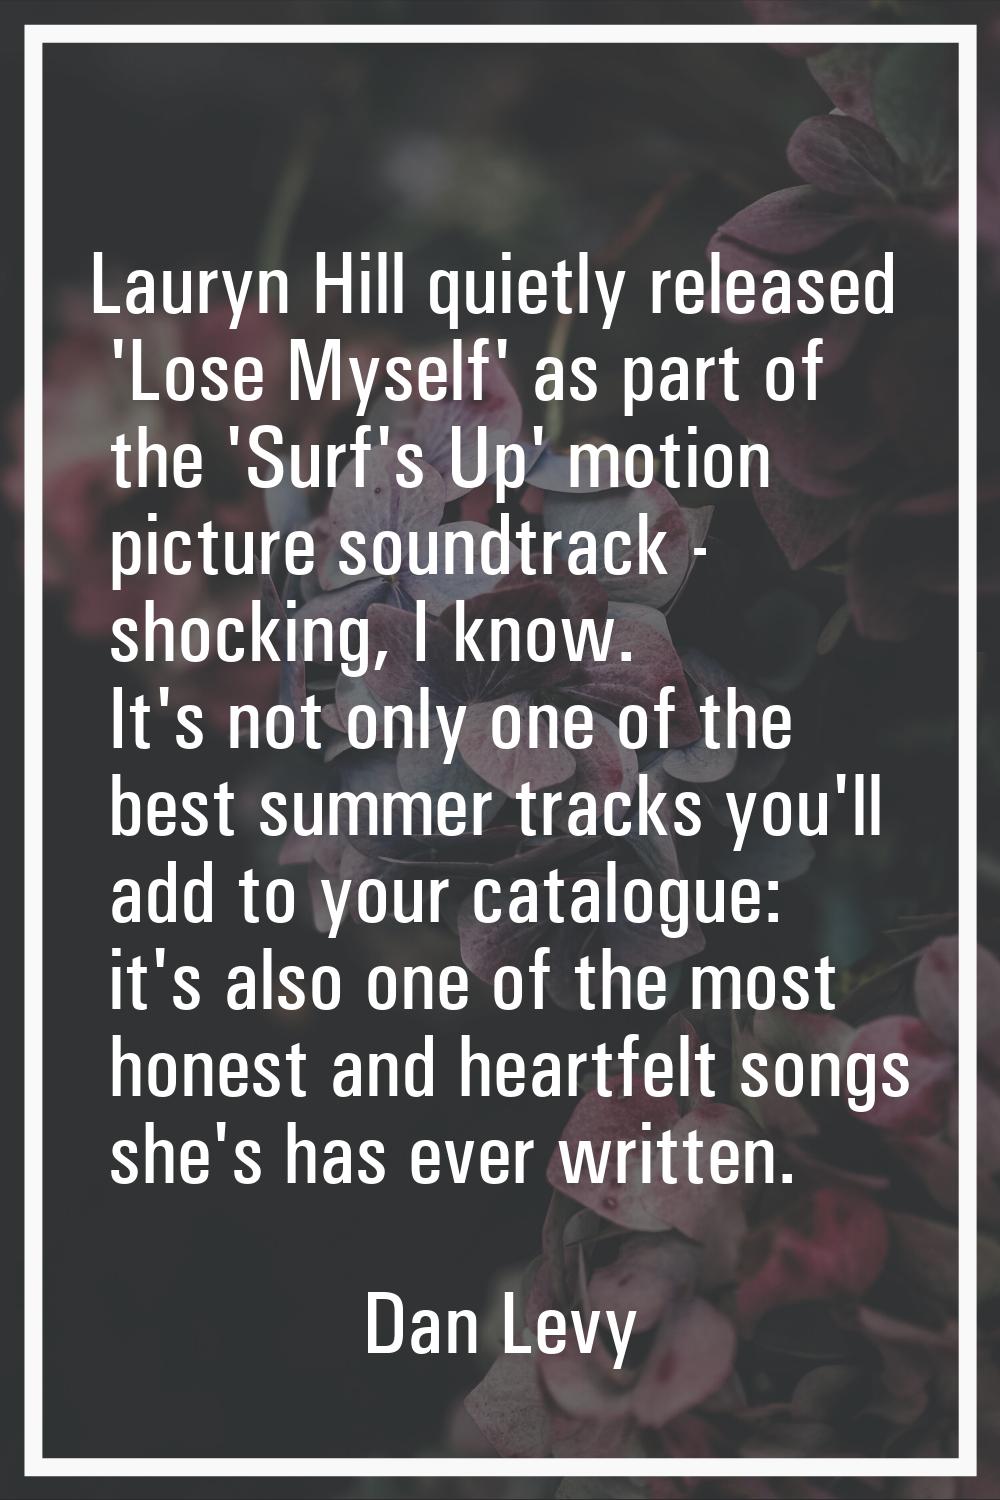 Lauryn Hill quietly released 'Lose Myself' as part of the 'Surf's Up' motion picture soundtrack - s